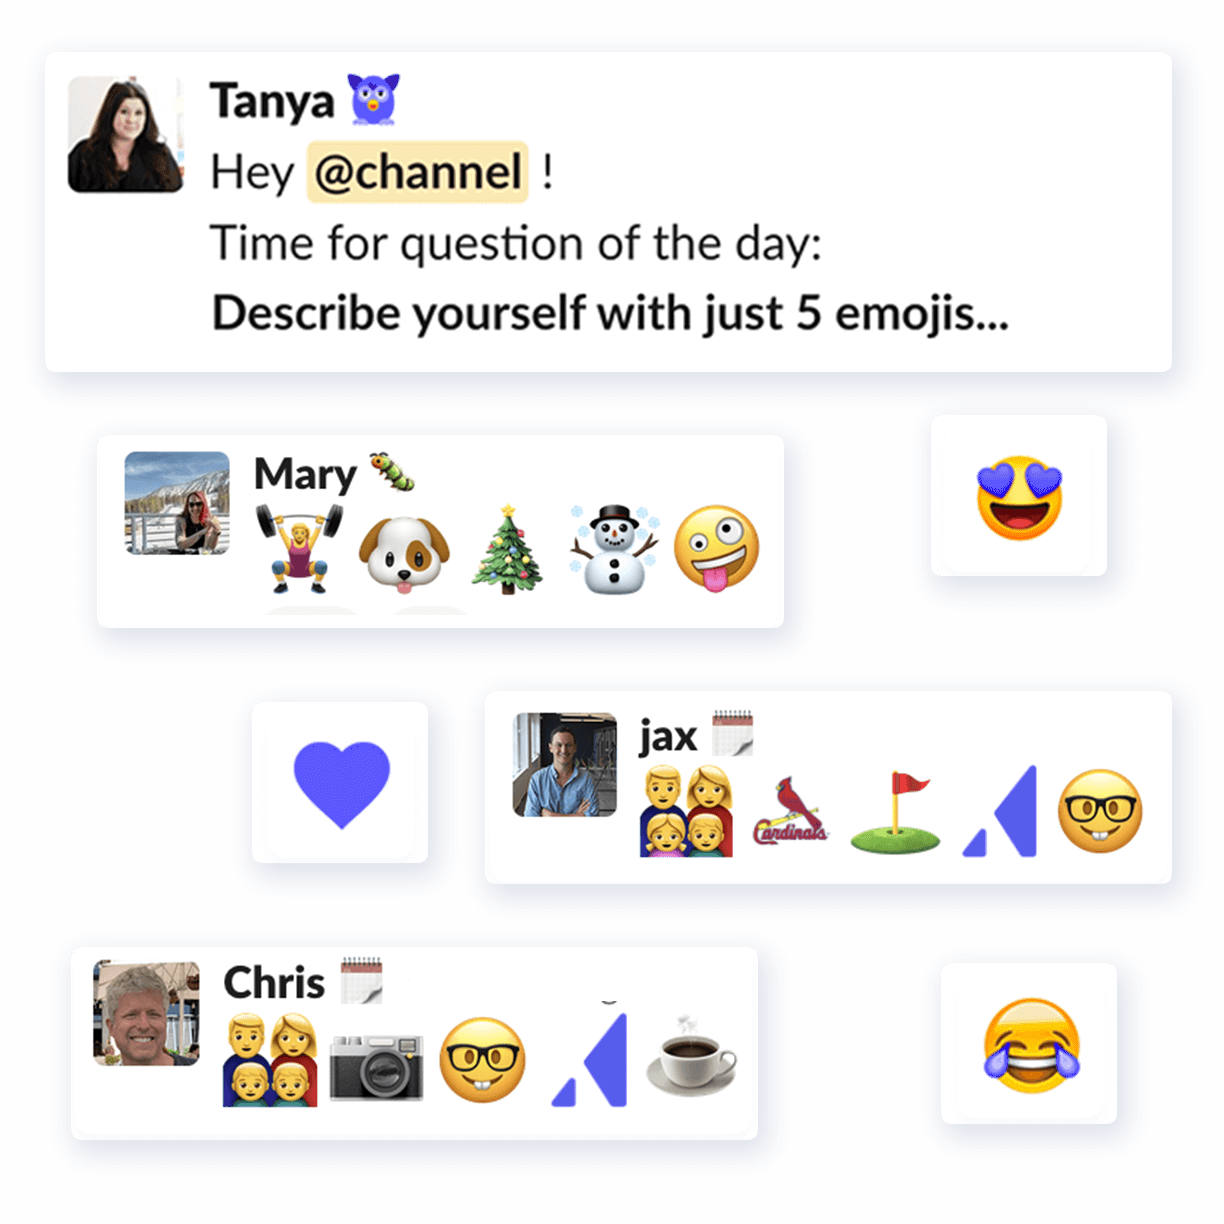 Image of multiple slack messages depicting a question of the day that you are asked to describe yourself with 5 emojis